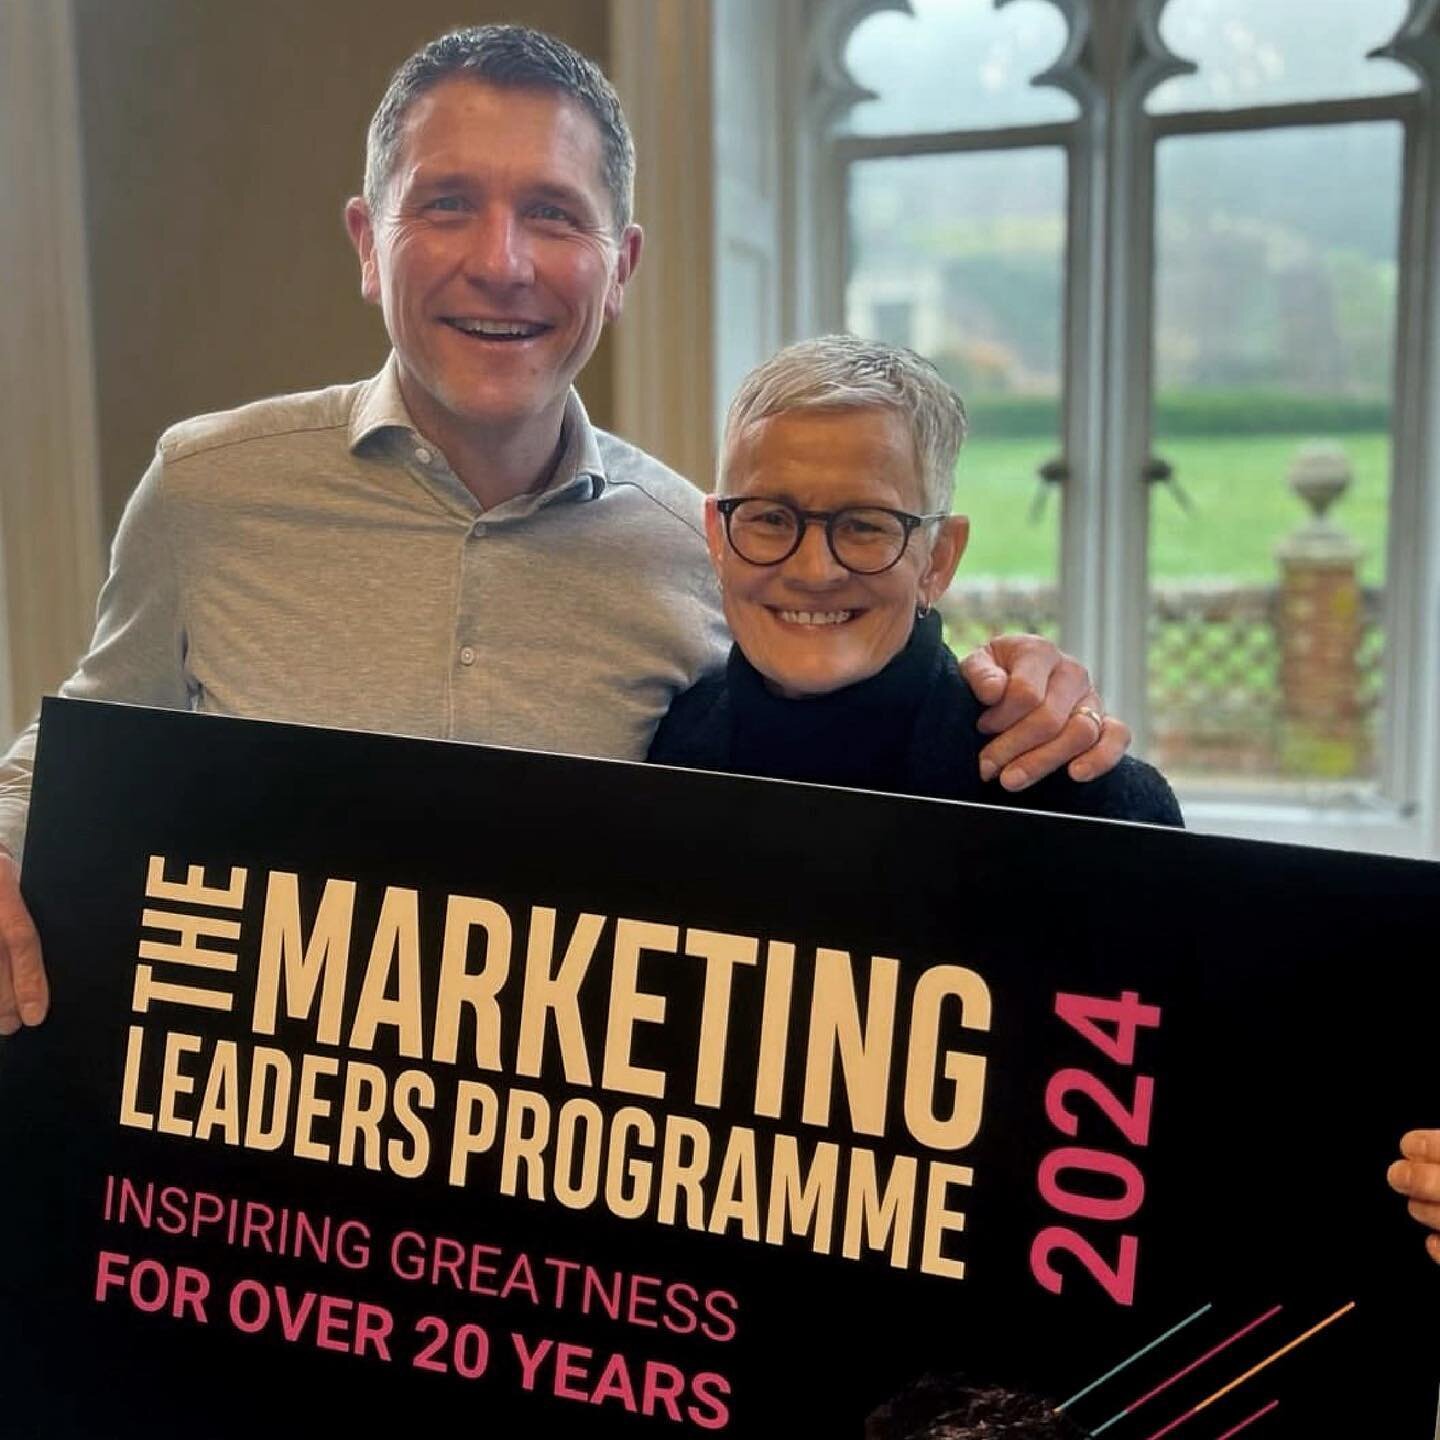 Thank you to you all.

What a truly wonderful experience co-leading, with Russ Pocock, Module One of the Marketing Leaders Programme was last week - meeting and working with a group of twenty brilliant people, all of whom are committed to &lsquo;bein